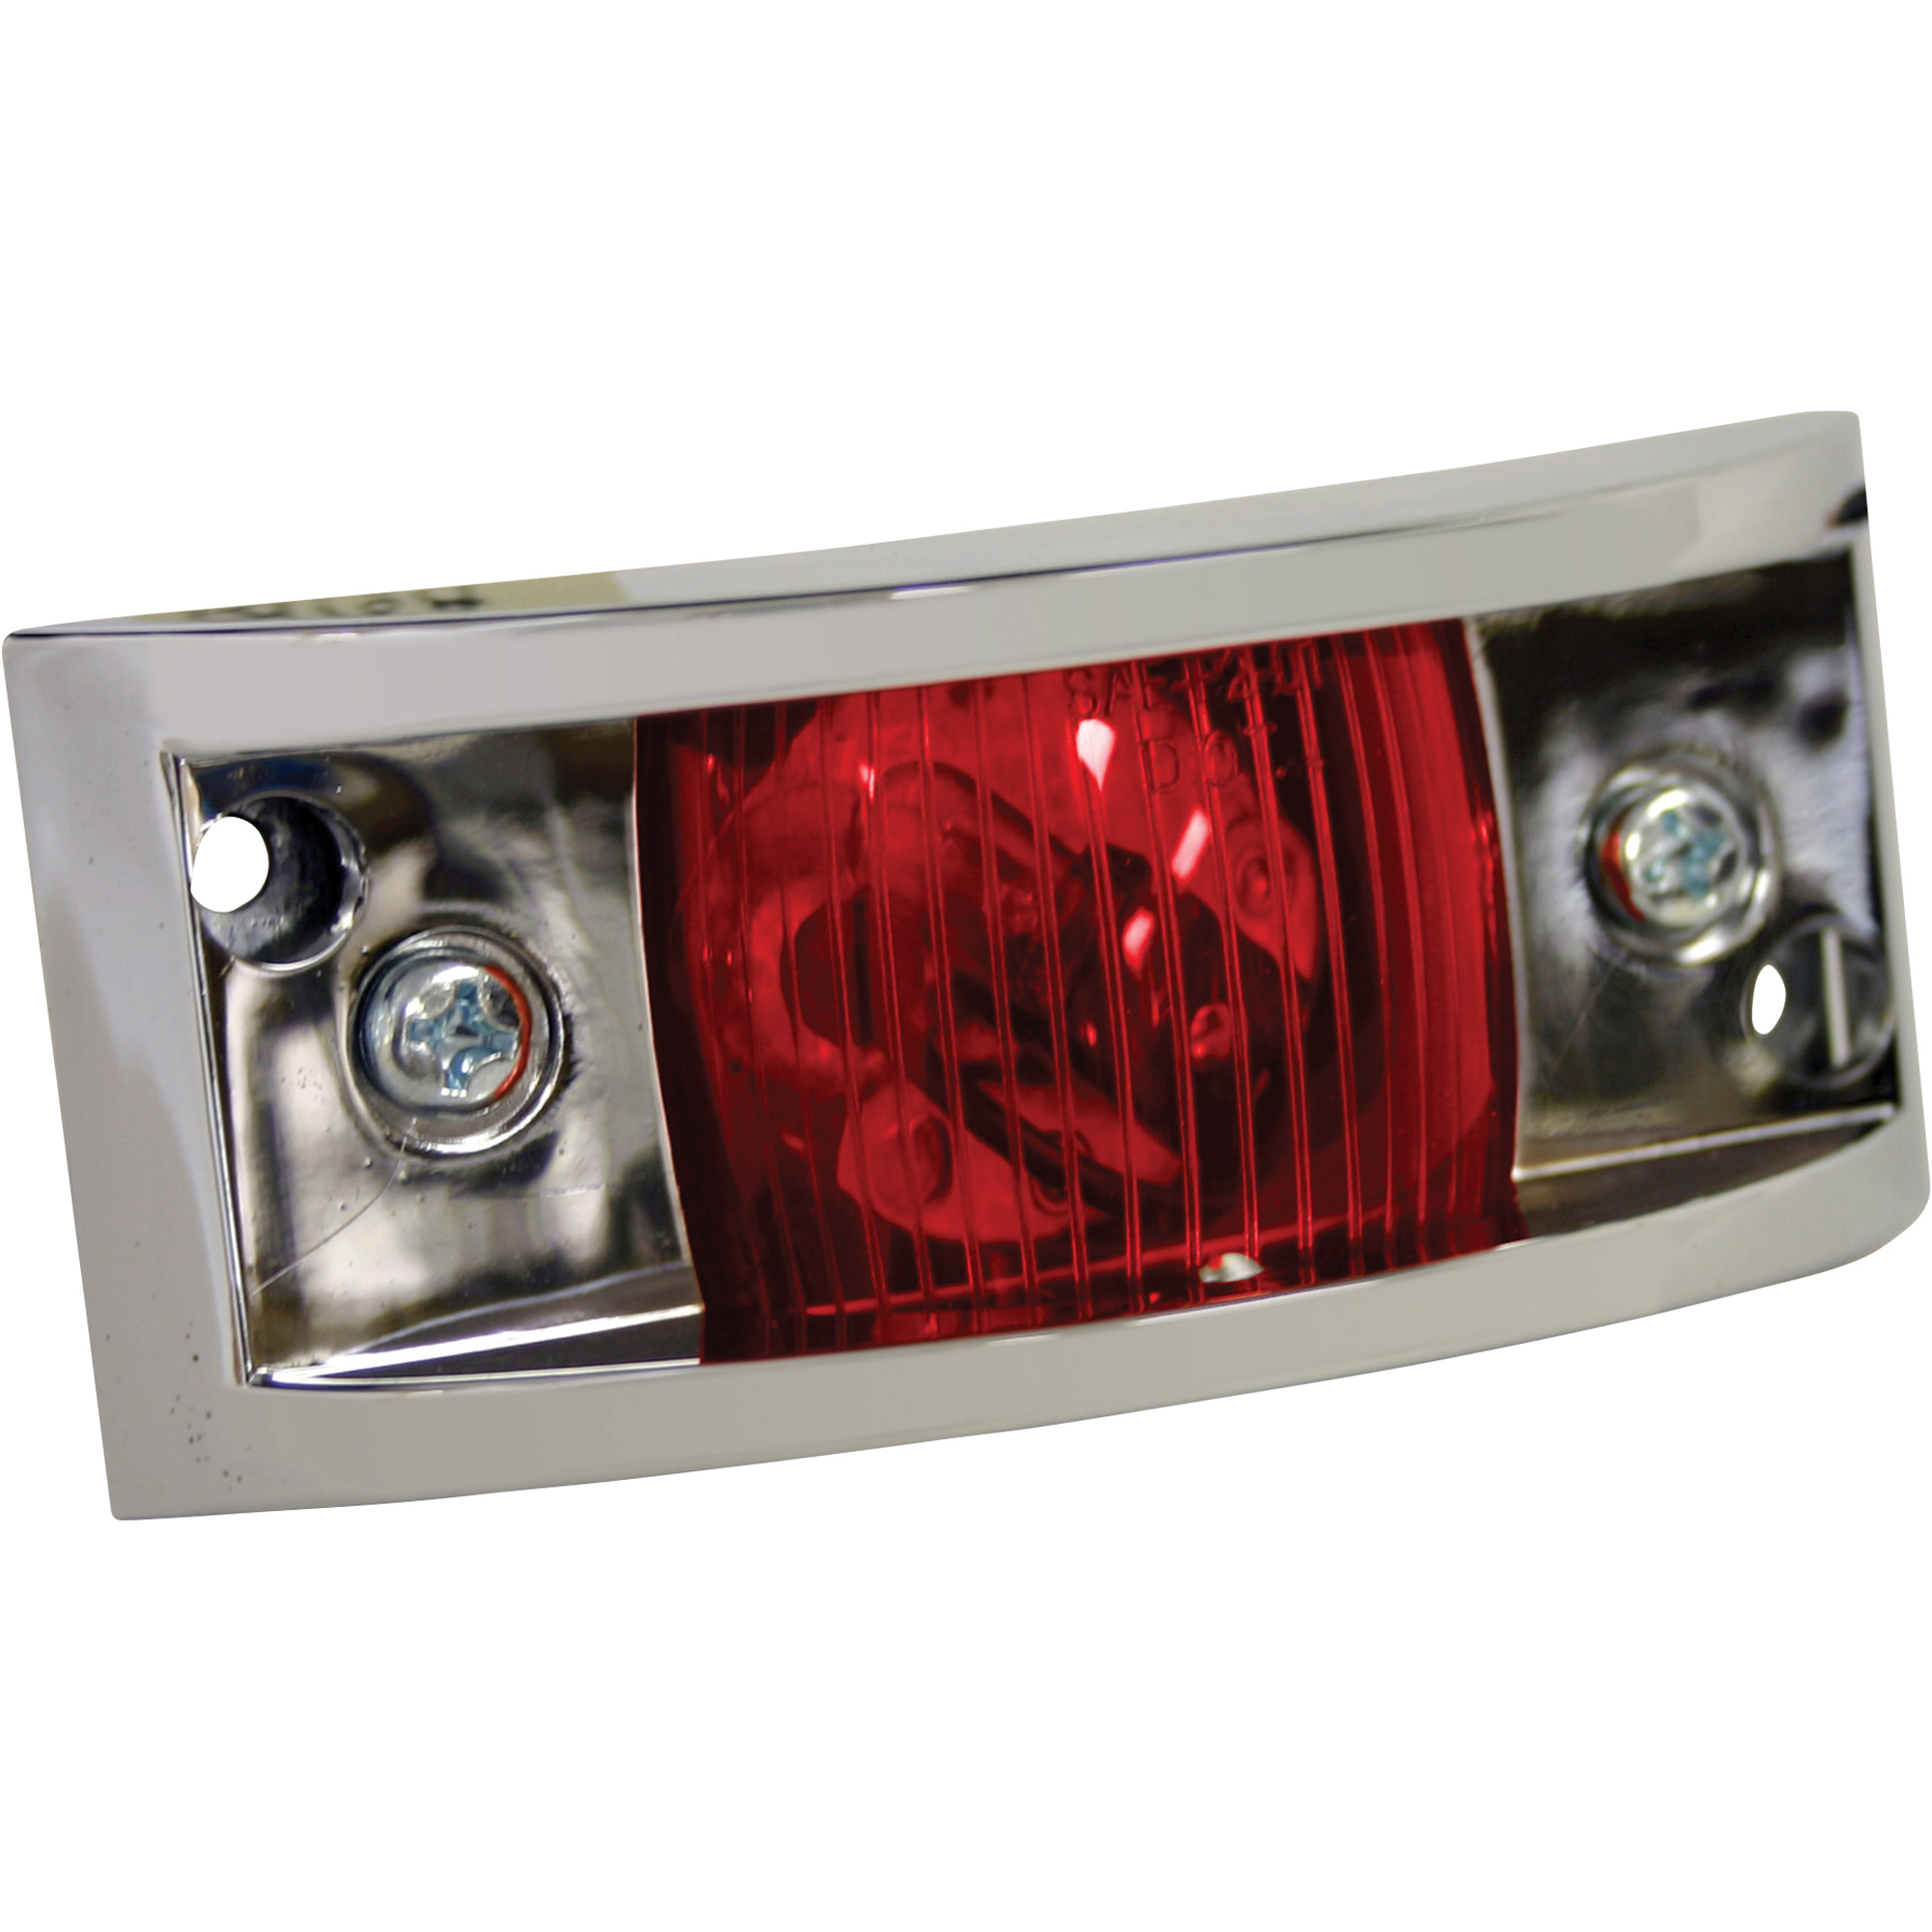 Hopkins Towing Solutions Incandescent Armored Clearance and Side Marker Trailer Light â 4 7/8Inch, Red, Model B478R